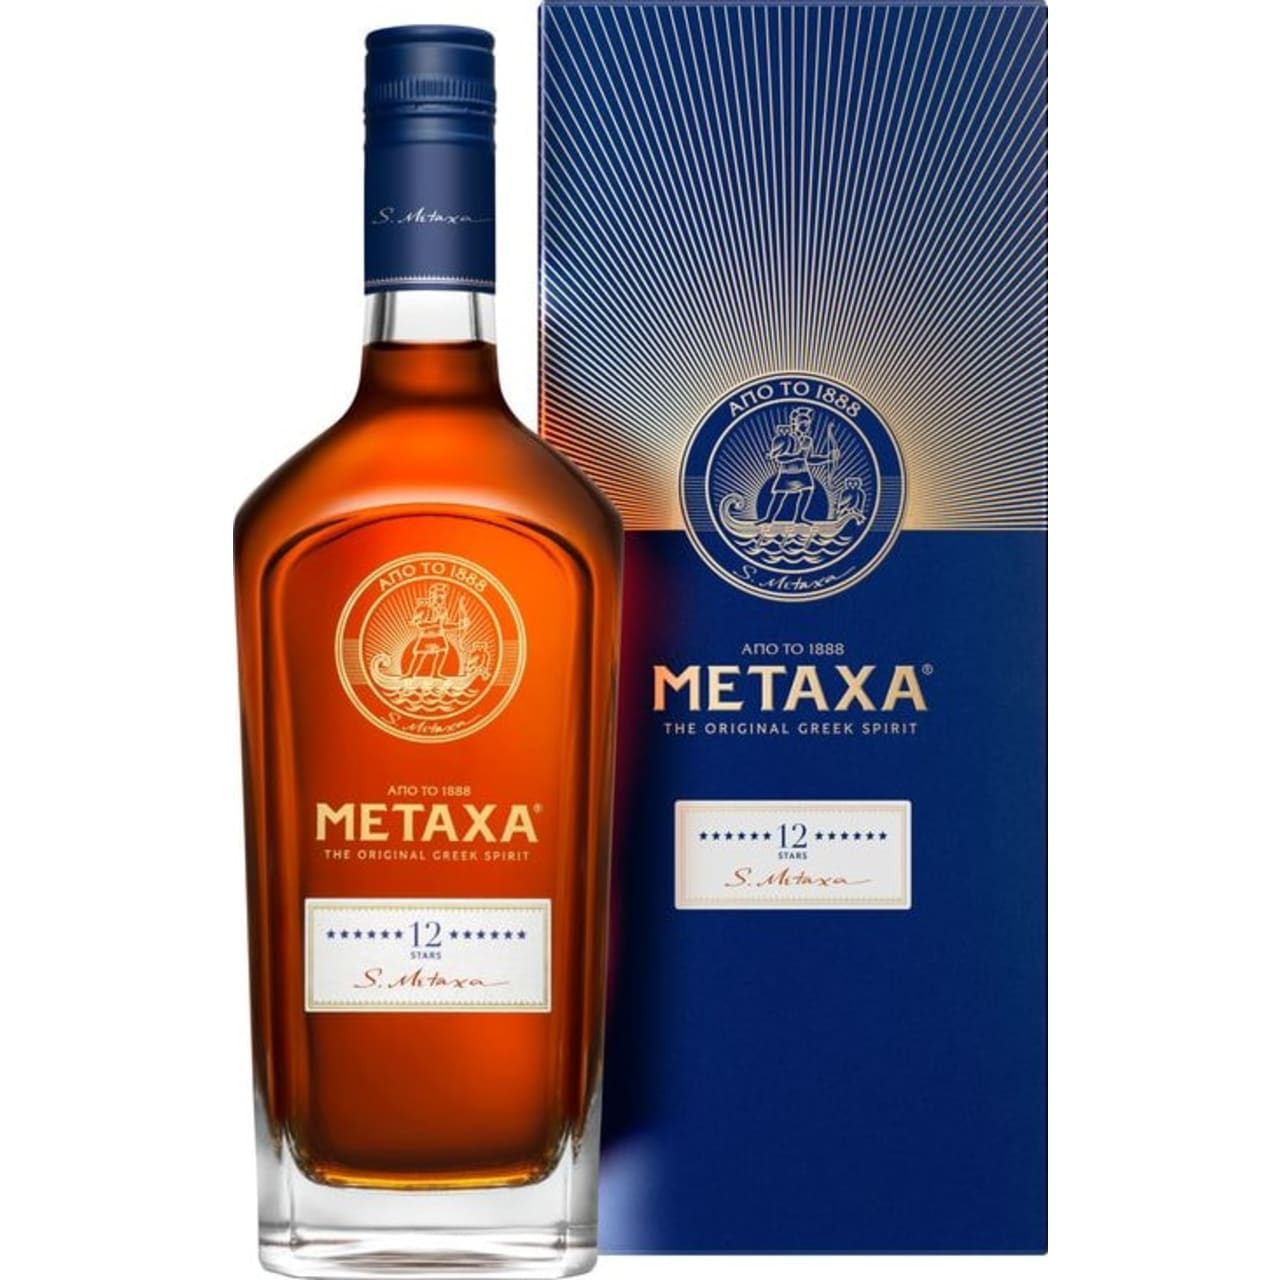 In 1888 Spyros Metaxa, by blending only the finest matured wine distillates with the selected sun soaked grapes of Attica, created this distinctive spirit giving it a unique smooth and mellow taste, neat, or on the rocks.